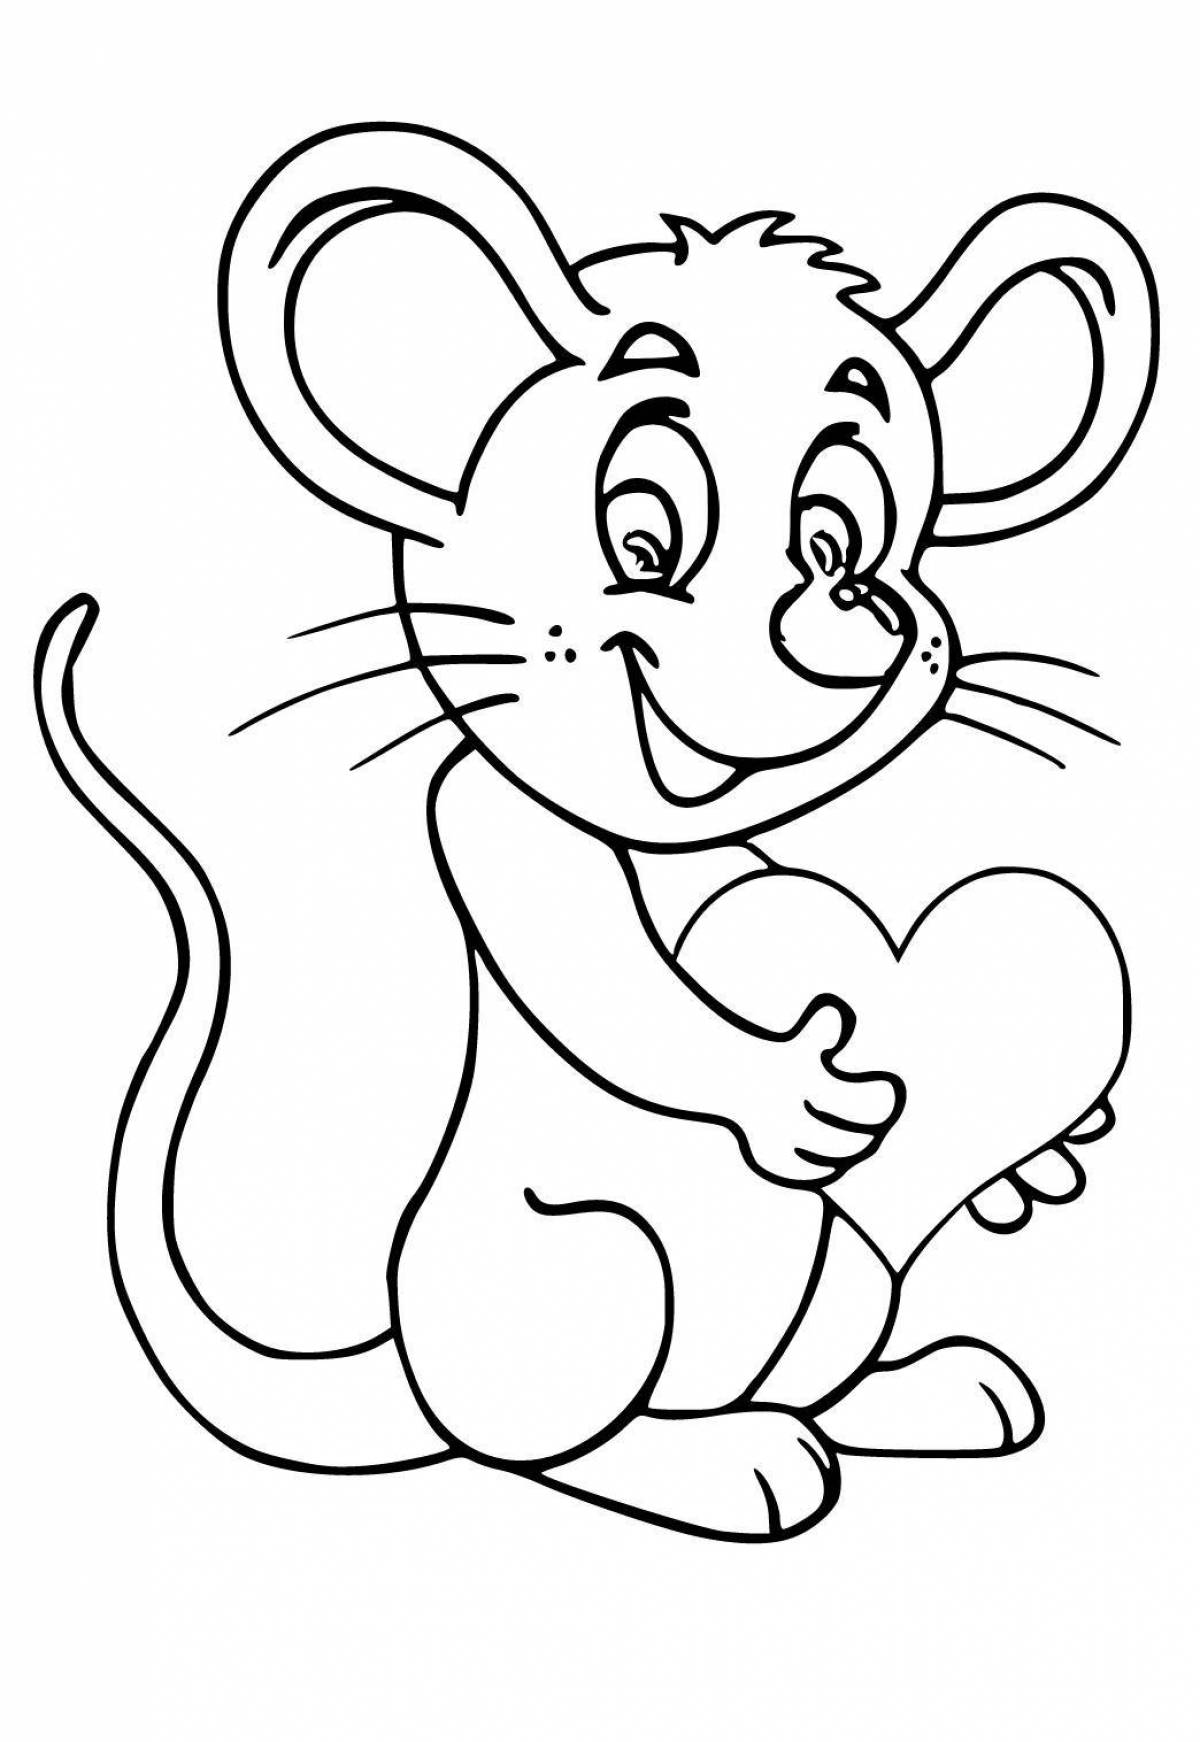 Children's coloring mouse for children 2-3 years old